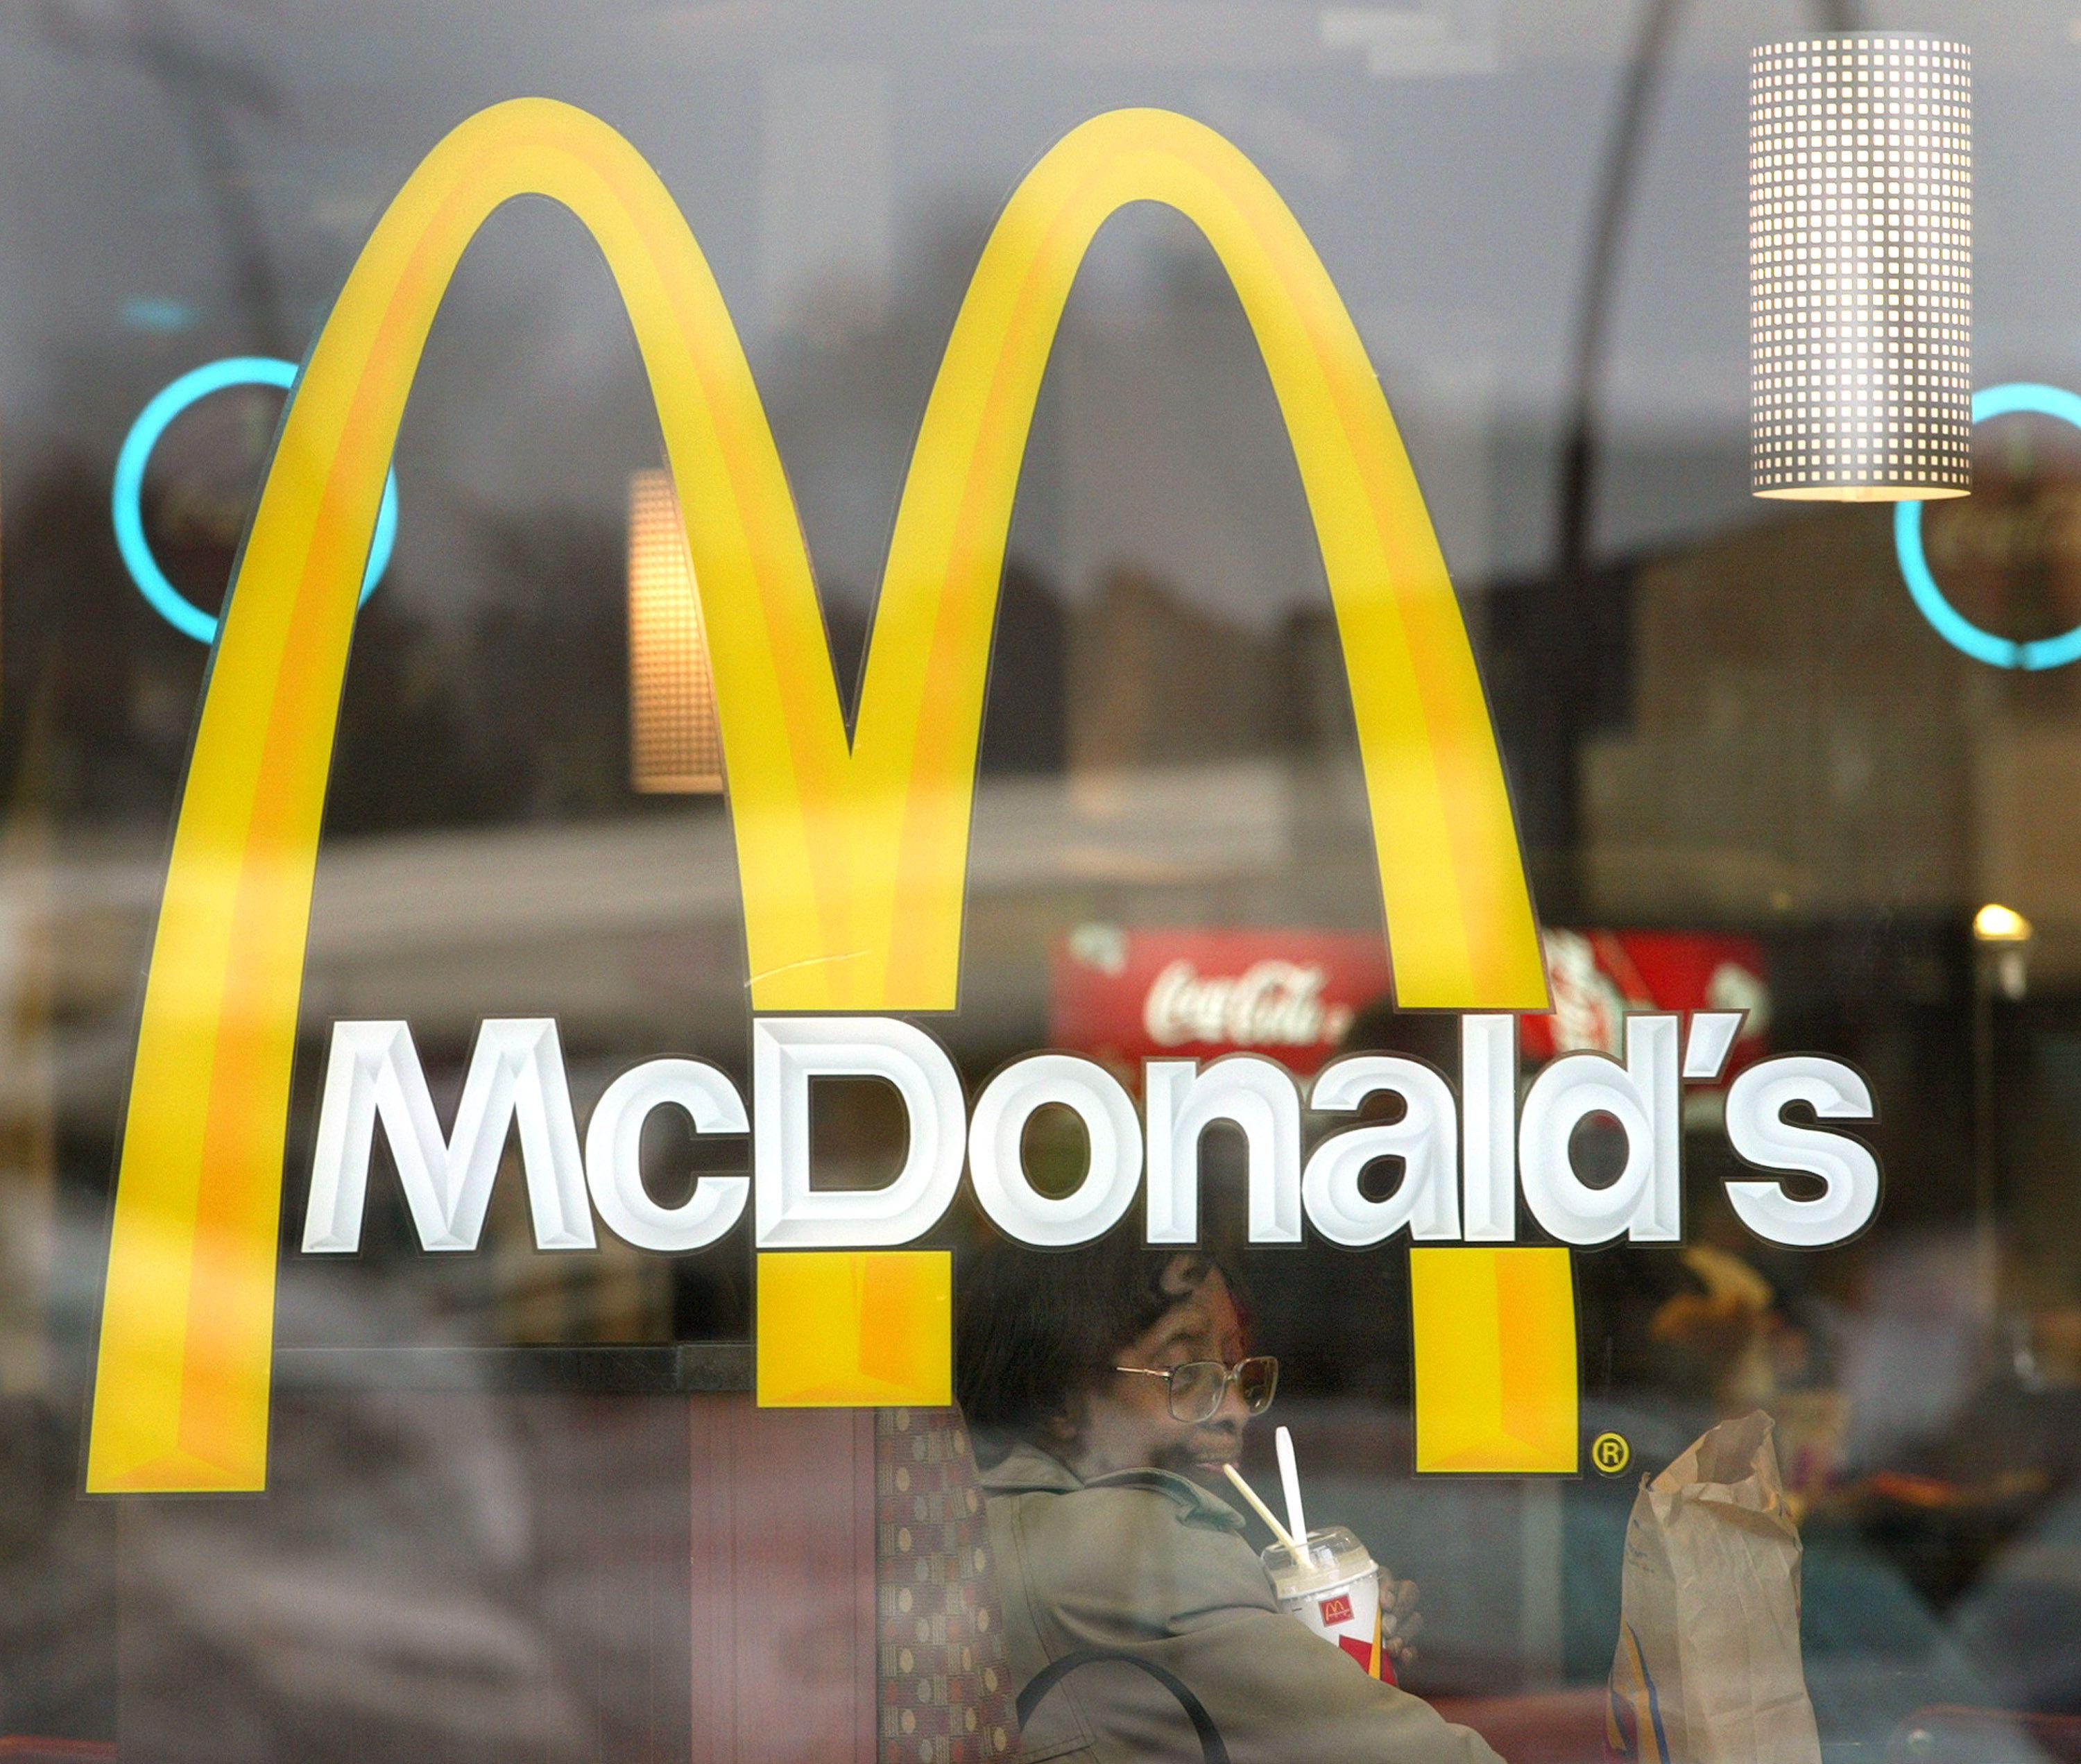 Chinese McDonald's Logo - McDonald's Edging Out KFC, Pizza Hut in China Revival Battle | Fortune